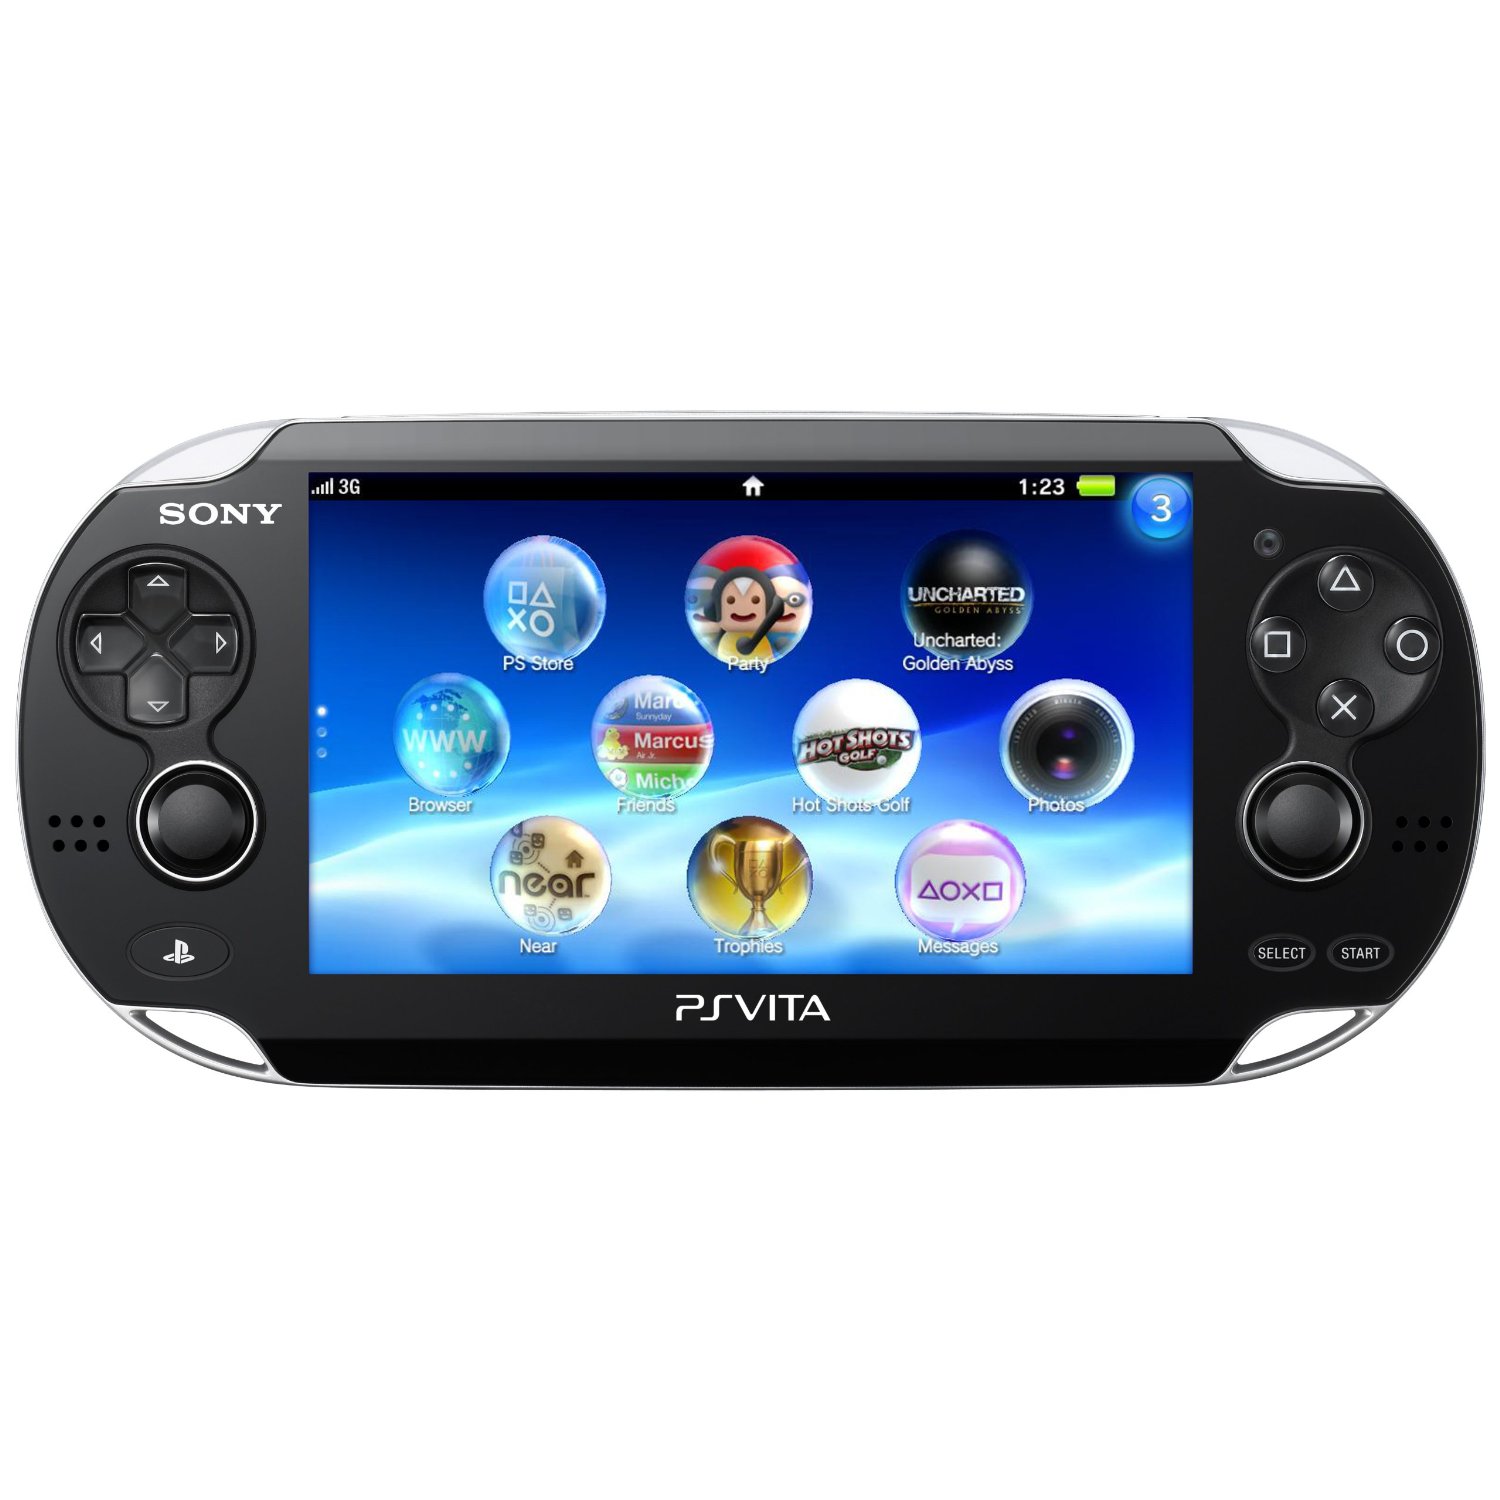 http://thetechjournal.com/wp-content/uploads/images/1108/1312713476-sonys-playstation-vita-hits-amazon-for-preorder--now-2.jpg